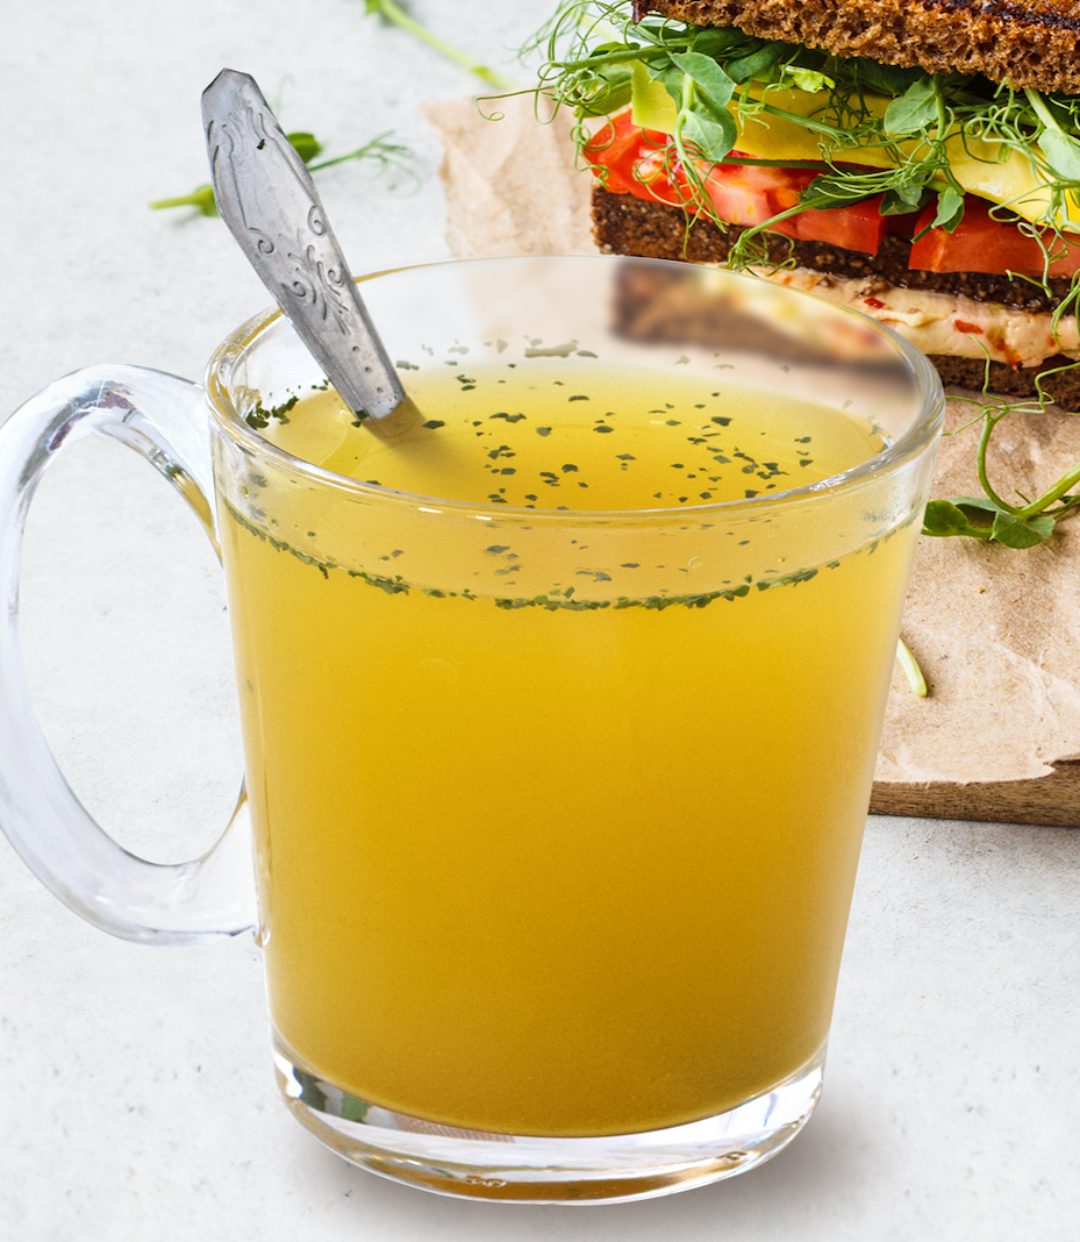 Ginger-Lemon, Cilantro & Turmeric Sprouted Mung Broth - 9 servings